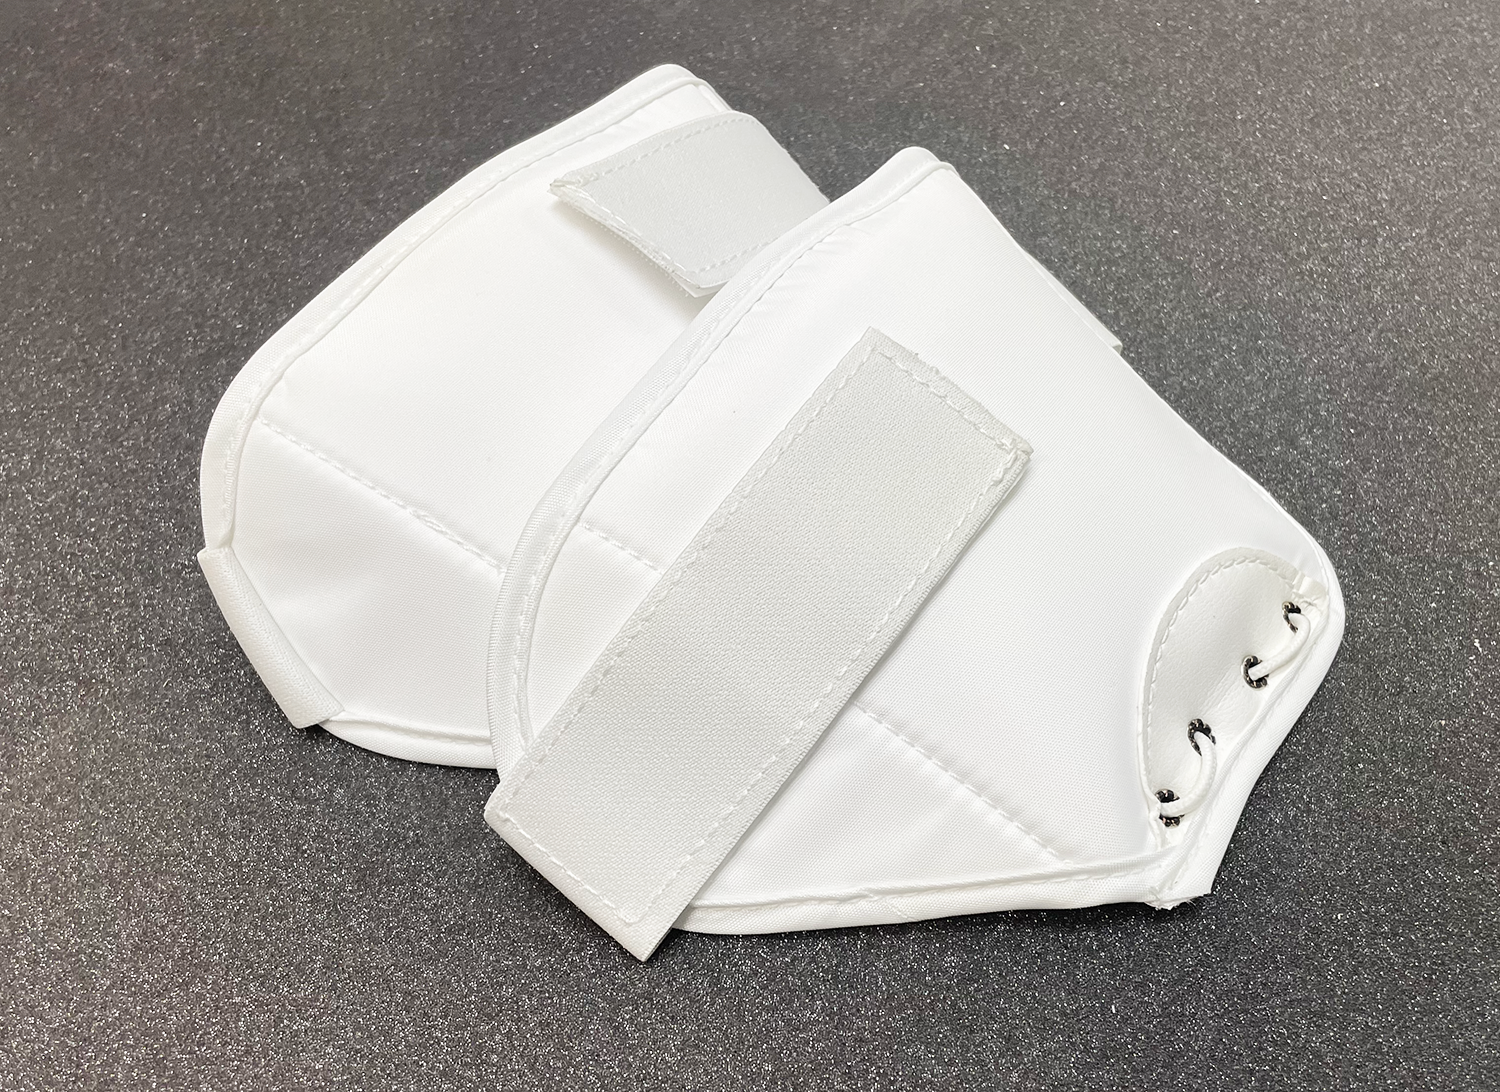 Angled profile of two white thigh guards